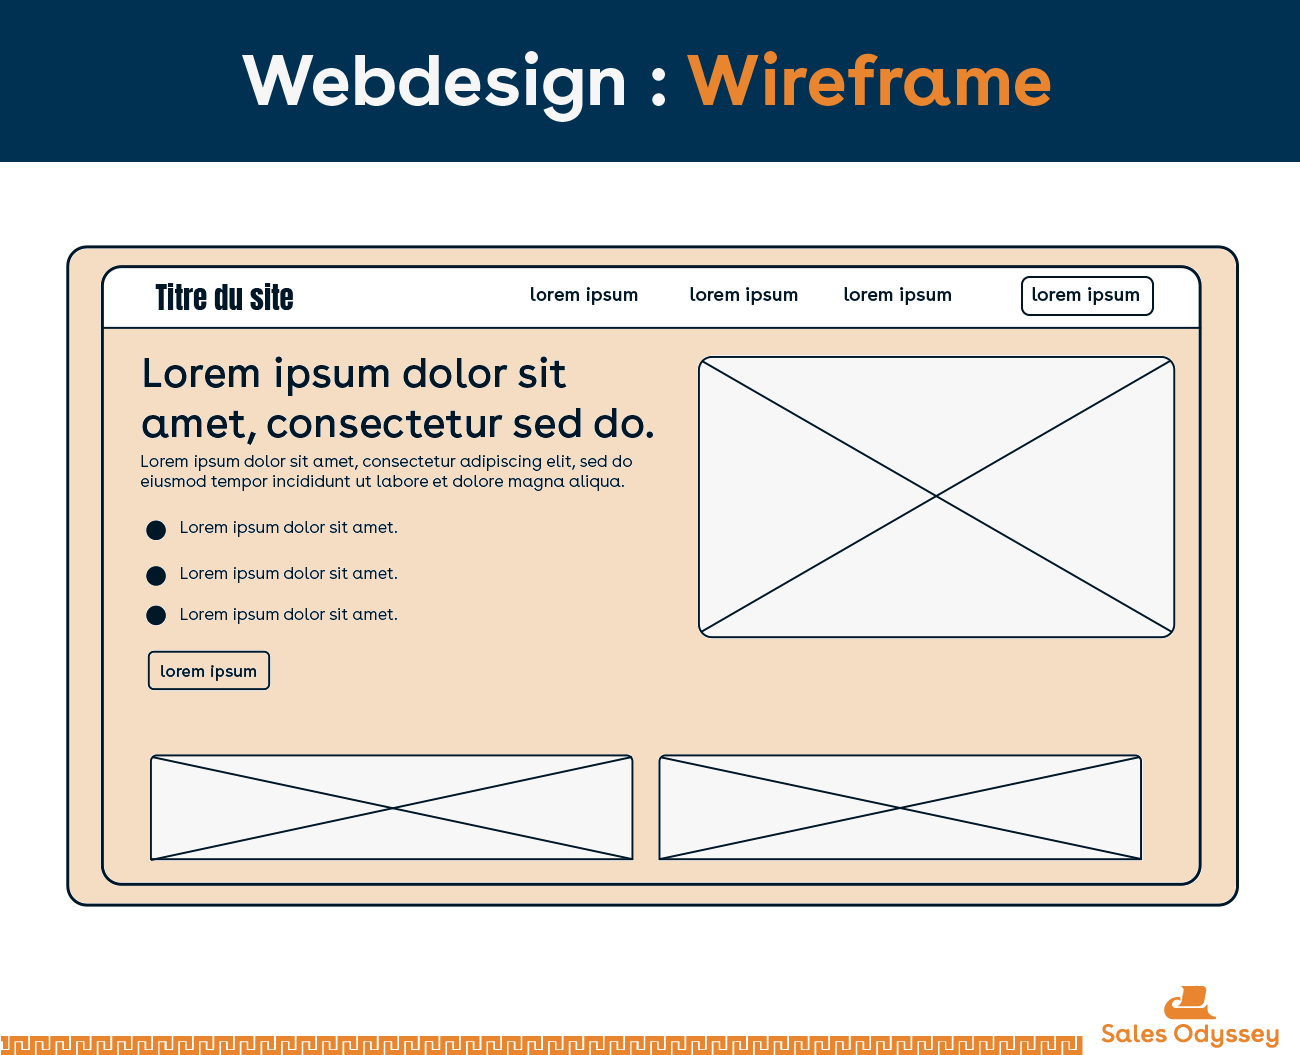 wireframe exemple